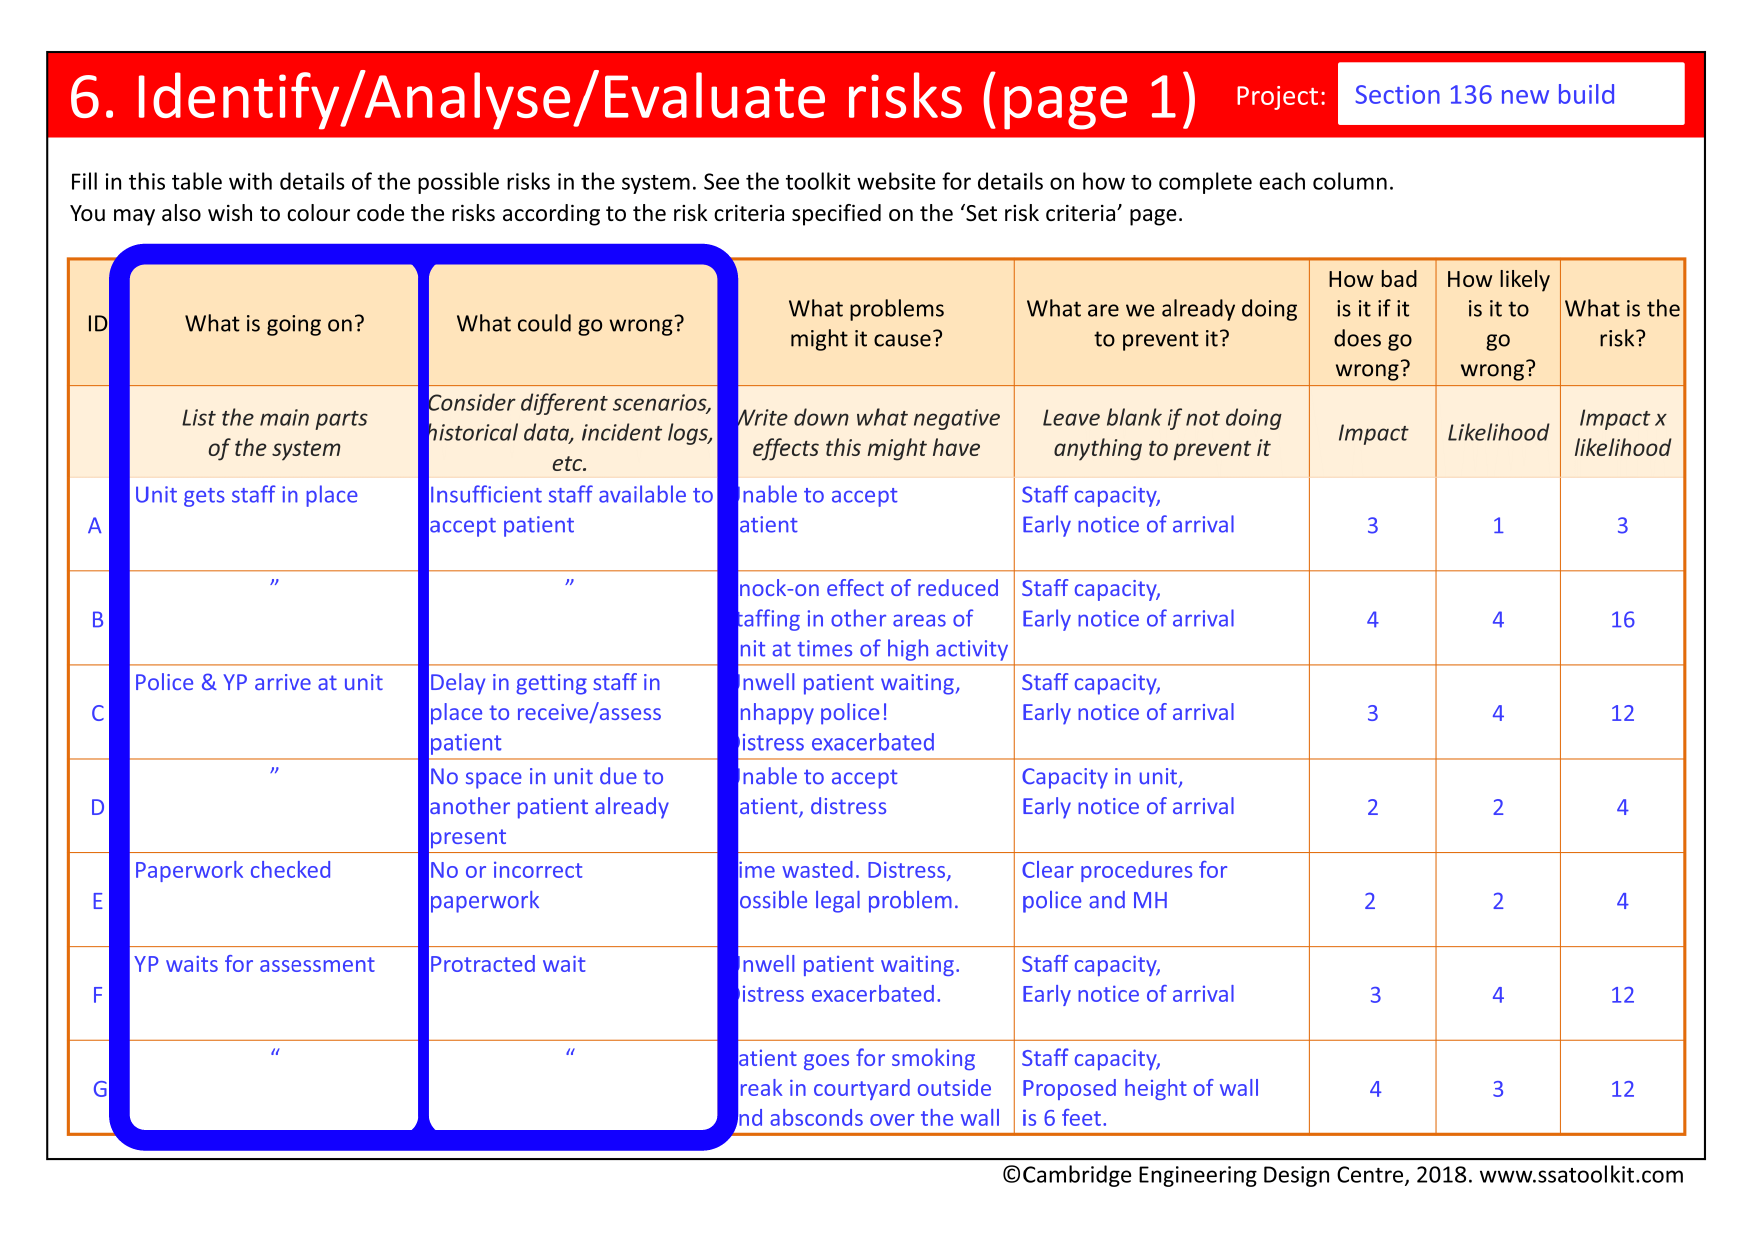 Screenshot of part of the risk table from the Section 136 case study. The following columns are circled: What is going on, and What could go wrong. For each item listed in the first, there is one or more thing that could go wrong listed in the second. For example, one item reads: Police and YP arrive at unit. Things that could go wrong with this are: Delay in getting staff in place to receive and assess the patient, and No space in unit due to another patient already being present. The full form in pdf is available from the Resources page.